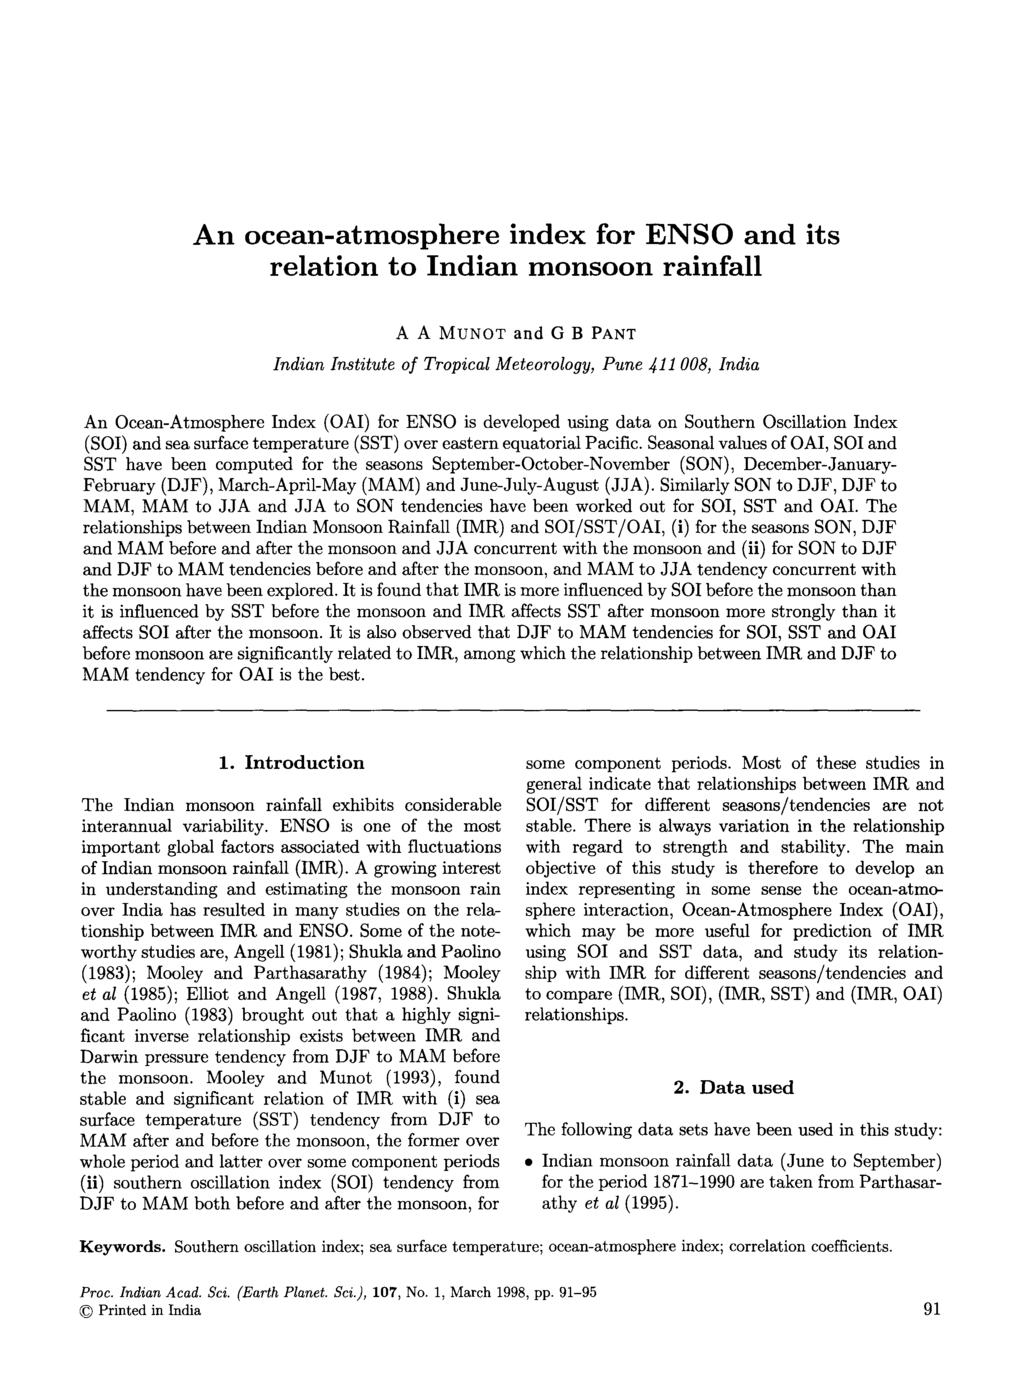 An ocean-atmosphere index for ENSO and its relation to Indian monsoon rainfall A A MUNOT and G B PANT Indian Institute of Tropical Meteorology, Pune 411 008, India An Ocean-Atmosphere Index (OAI) for